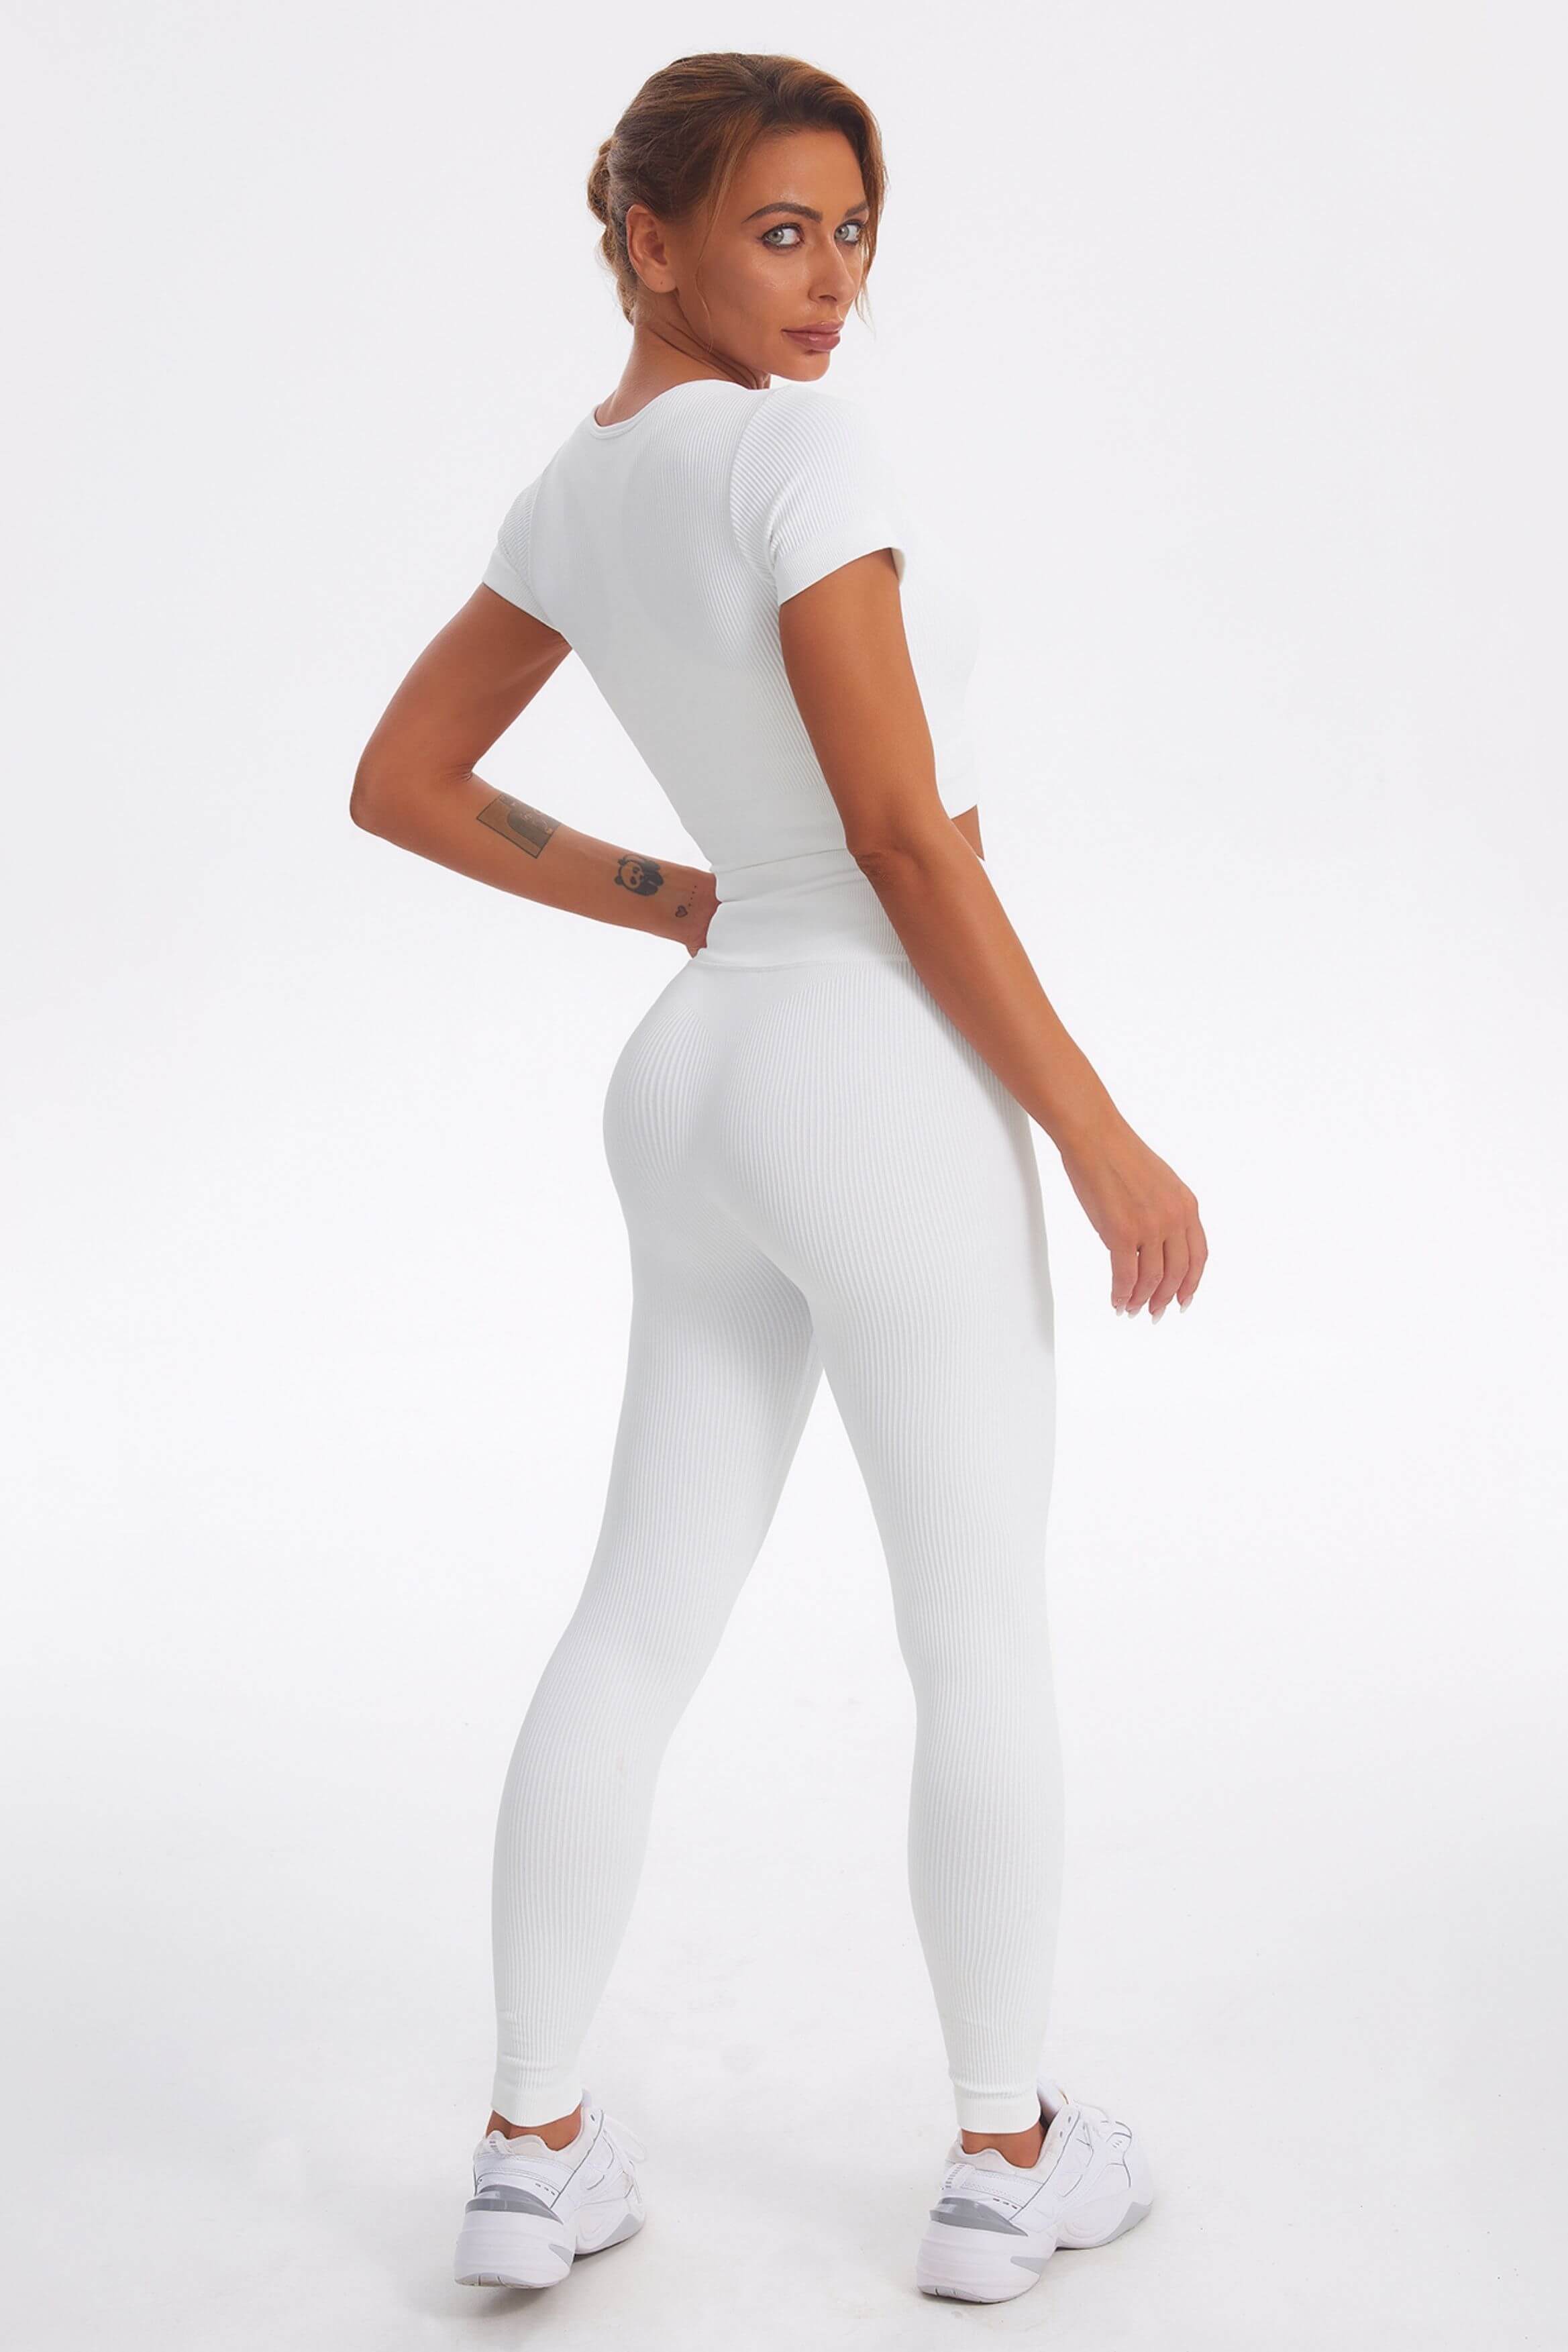 RUUHEE Workout Sets for Women Seamless 2 Piece Outfits Strap Large, White